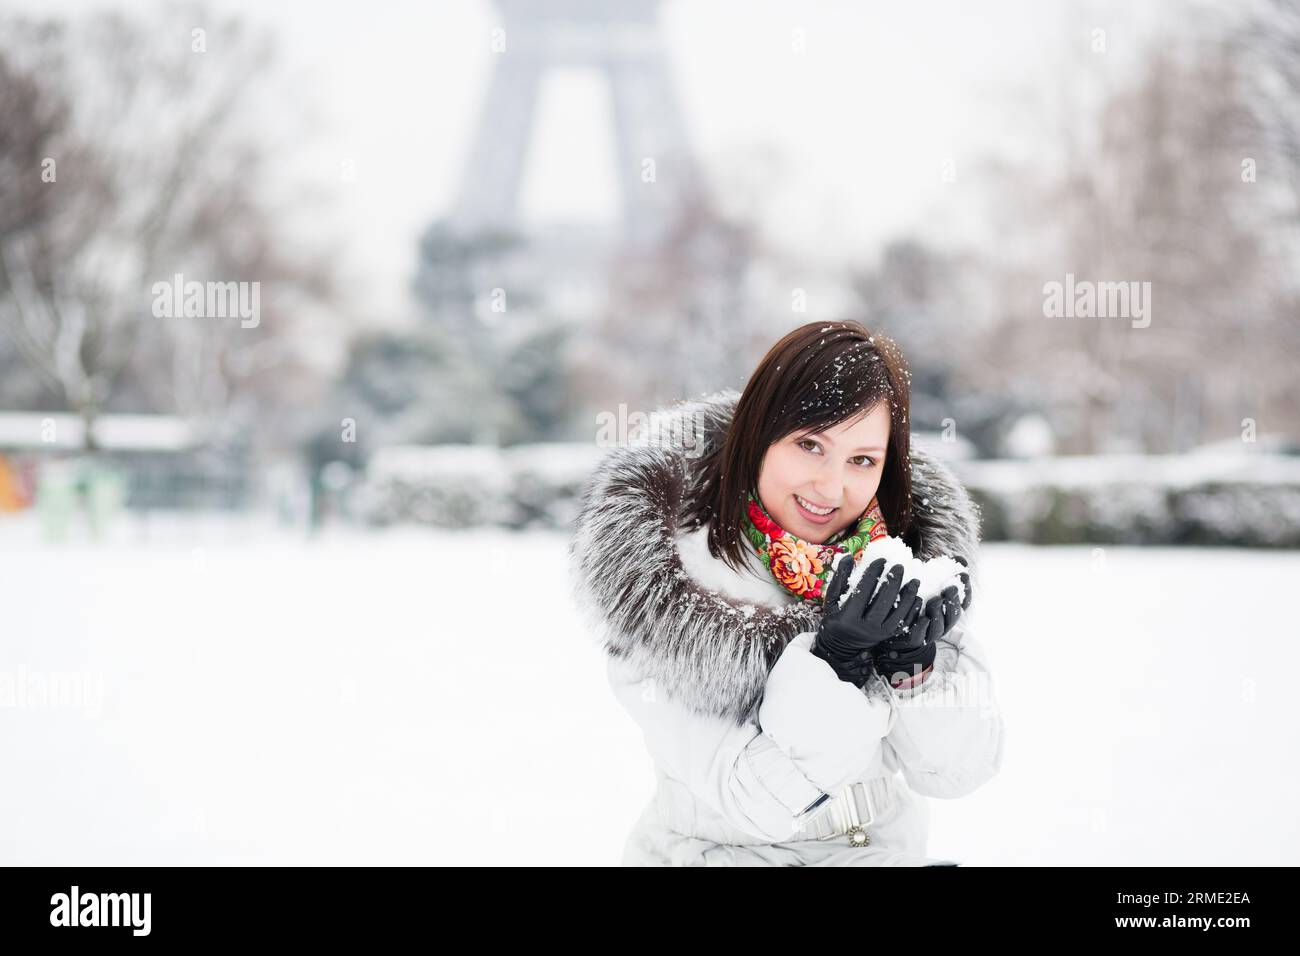 French girl on a winter day Stock Photo